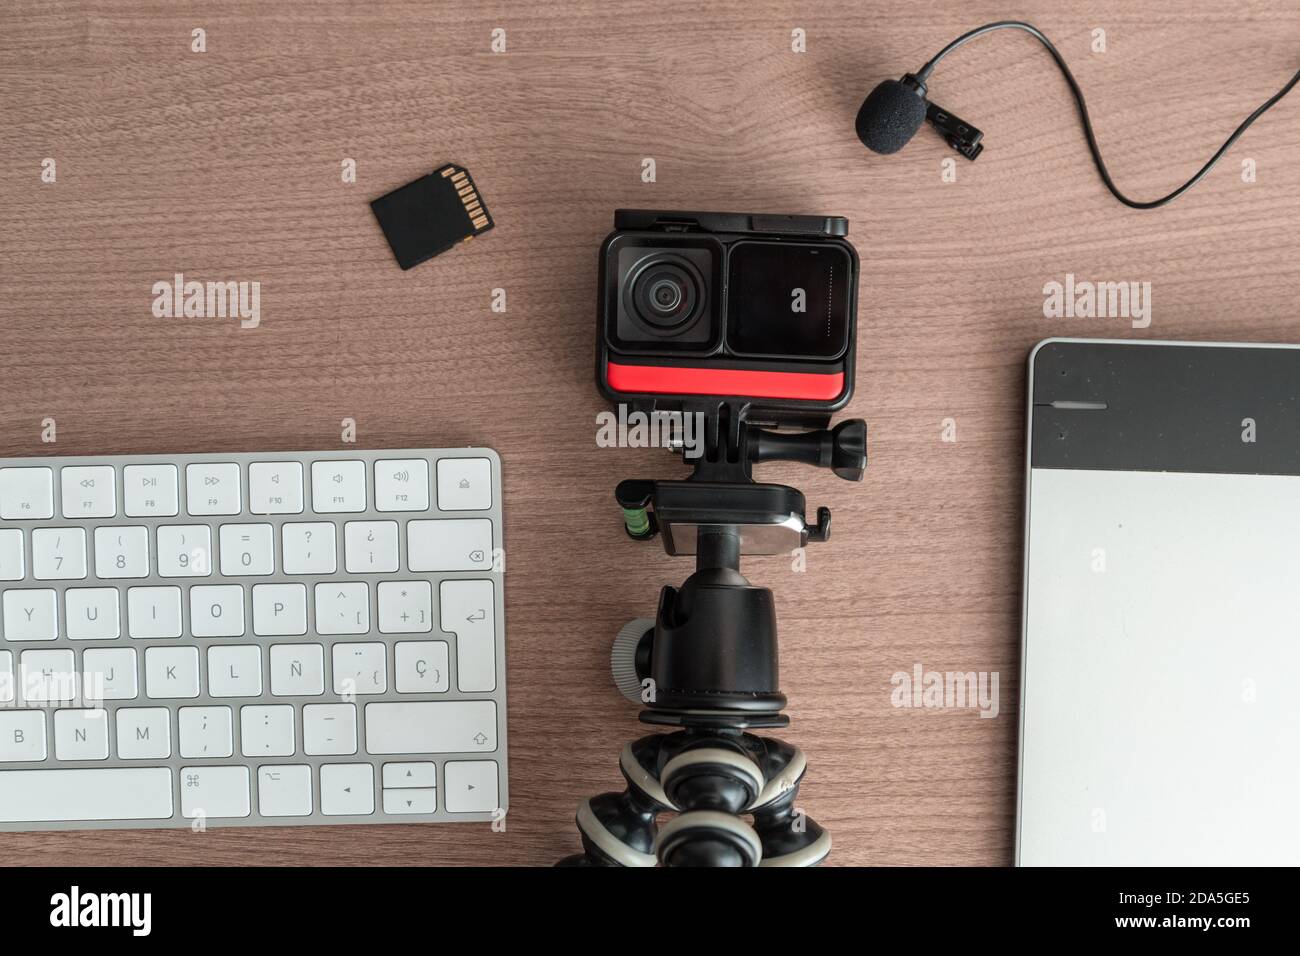 different technological gadgets on the work desk, there is a camera, microphone, sd card, keyboard, technology and modern objects Stock Photo